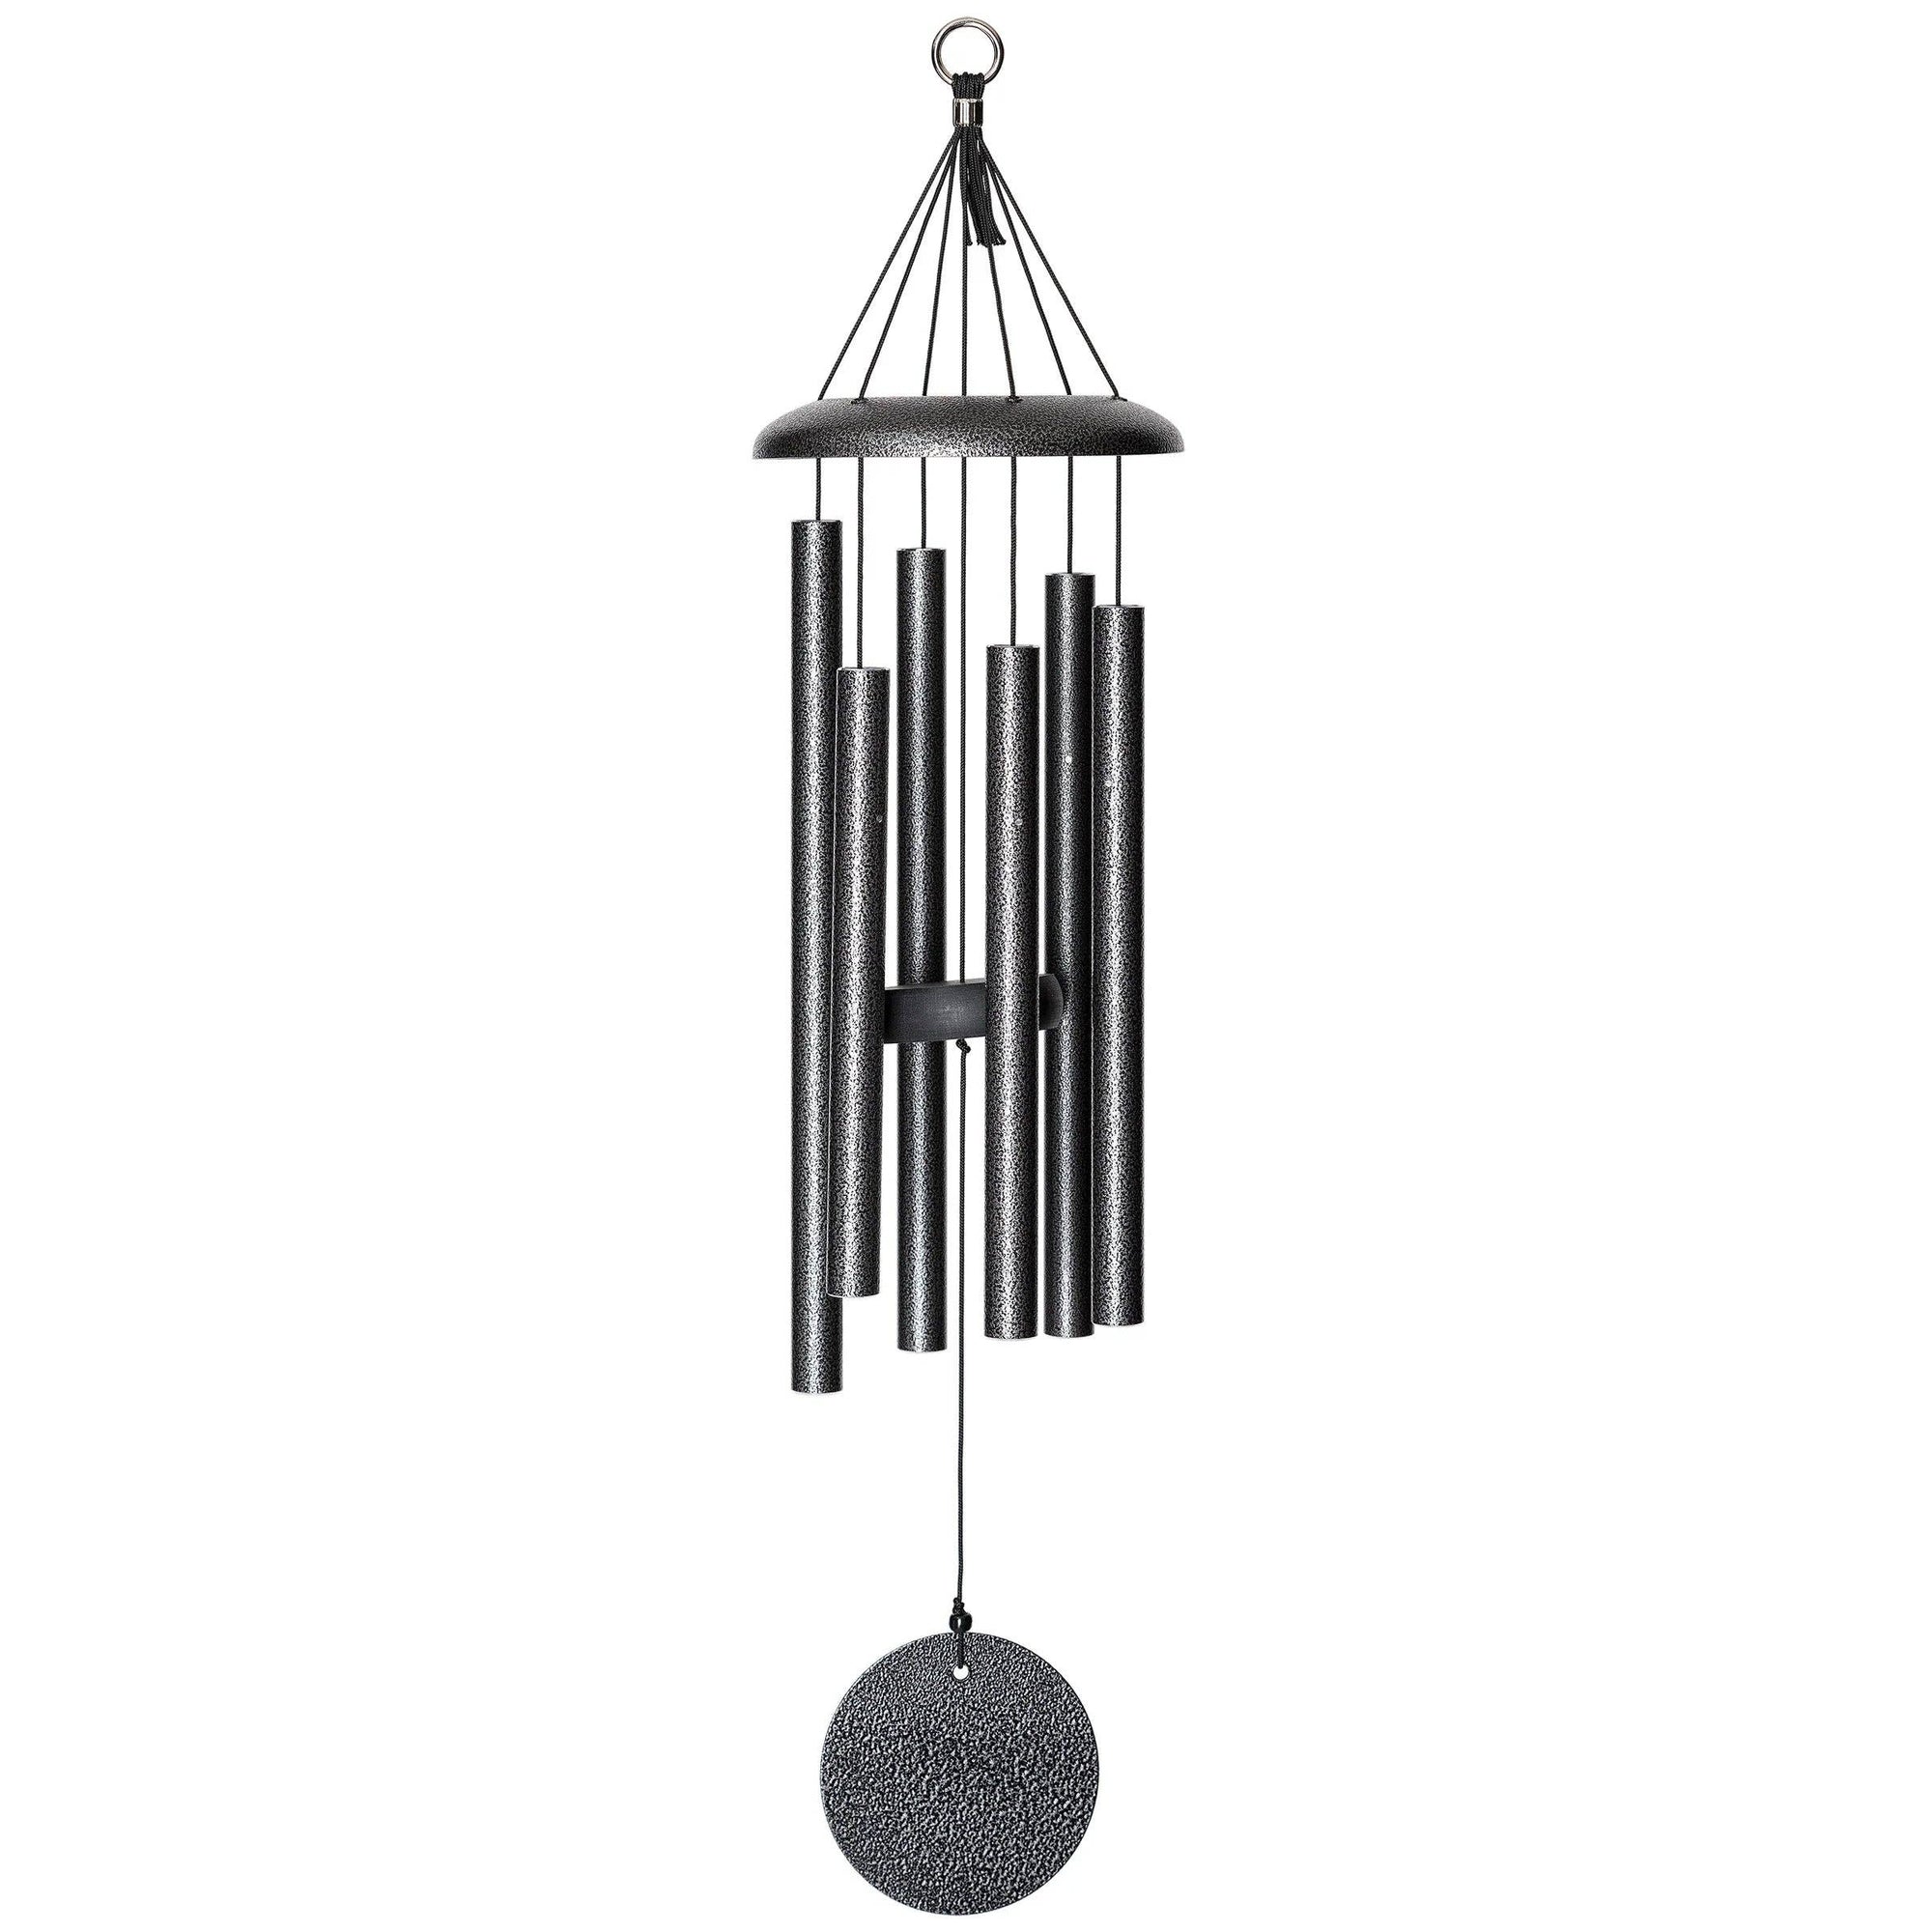 A 27" Windchime Corinthian Bells® hanging on a white background for stylish decor on a budget.